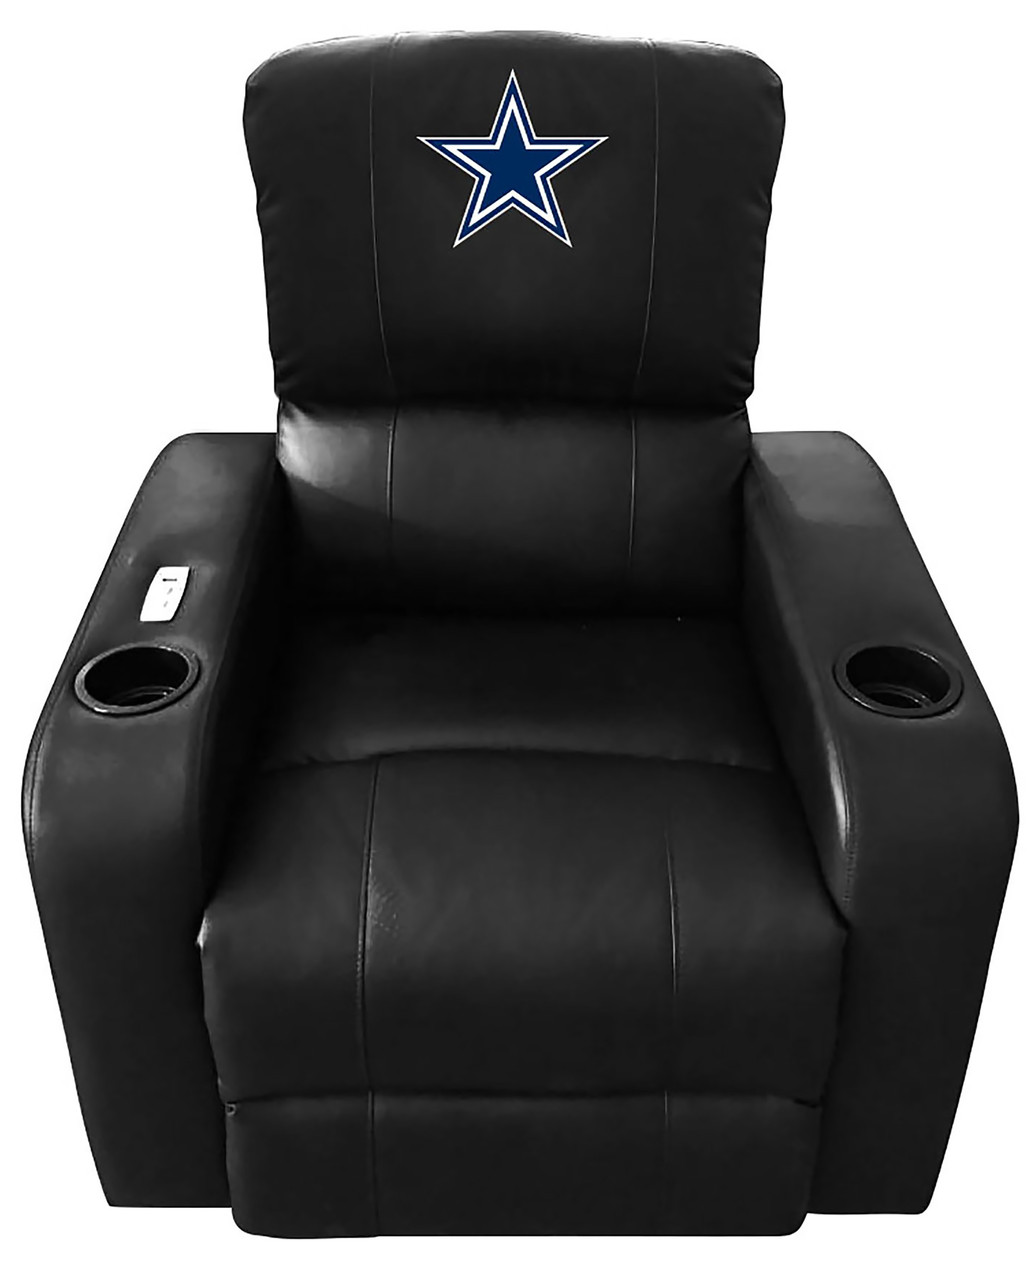 Dallas Cowboys Powered Theater Recliner With USB Port CB